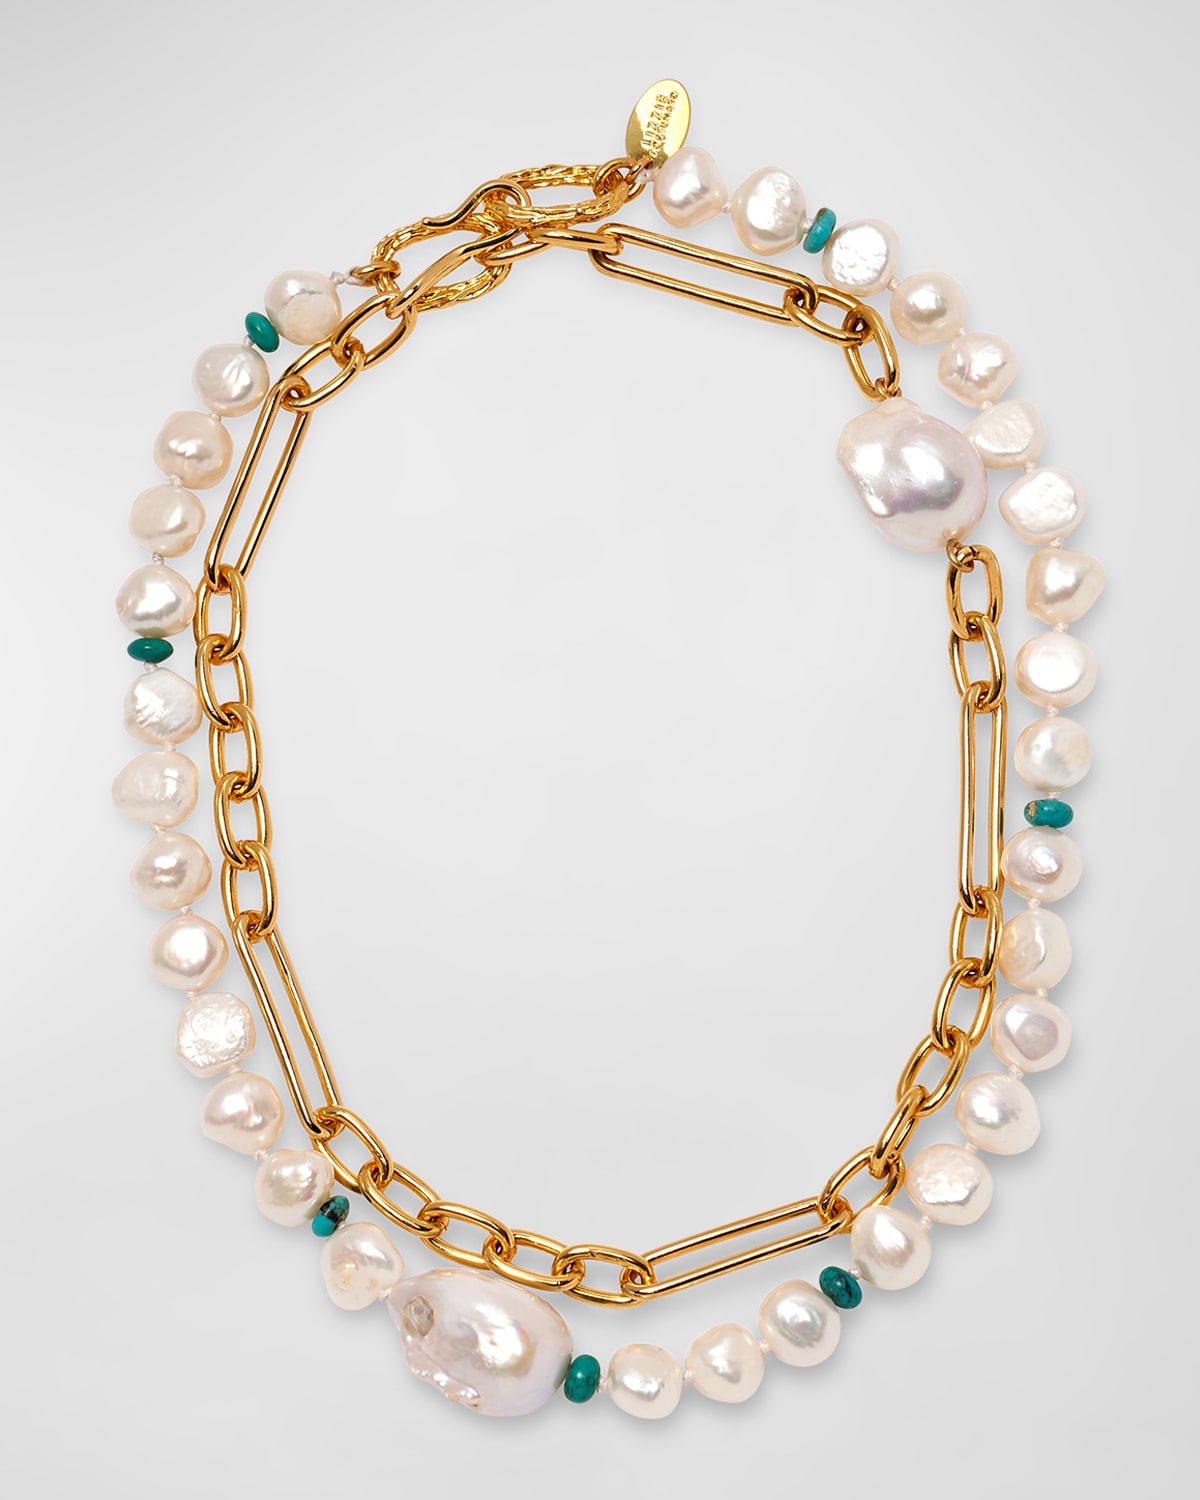 Lizzie Fortunato Harbor 24K Gold Plated Pearl and Turquoise Chainlink Wrap Necklace